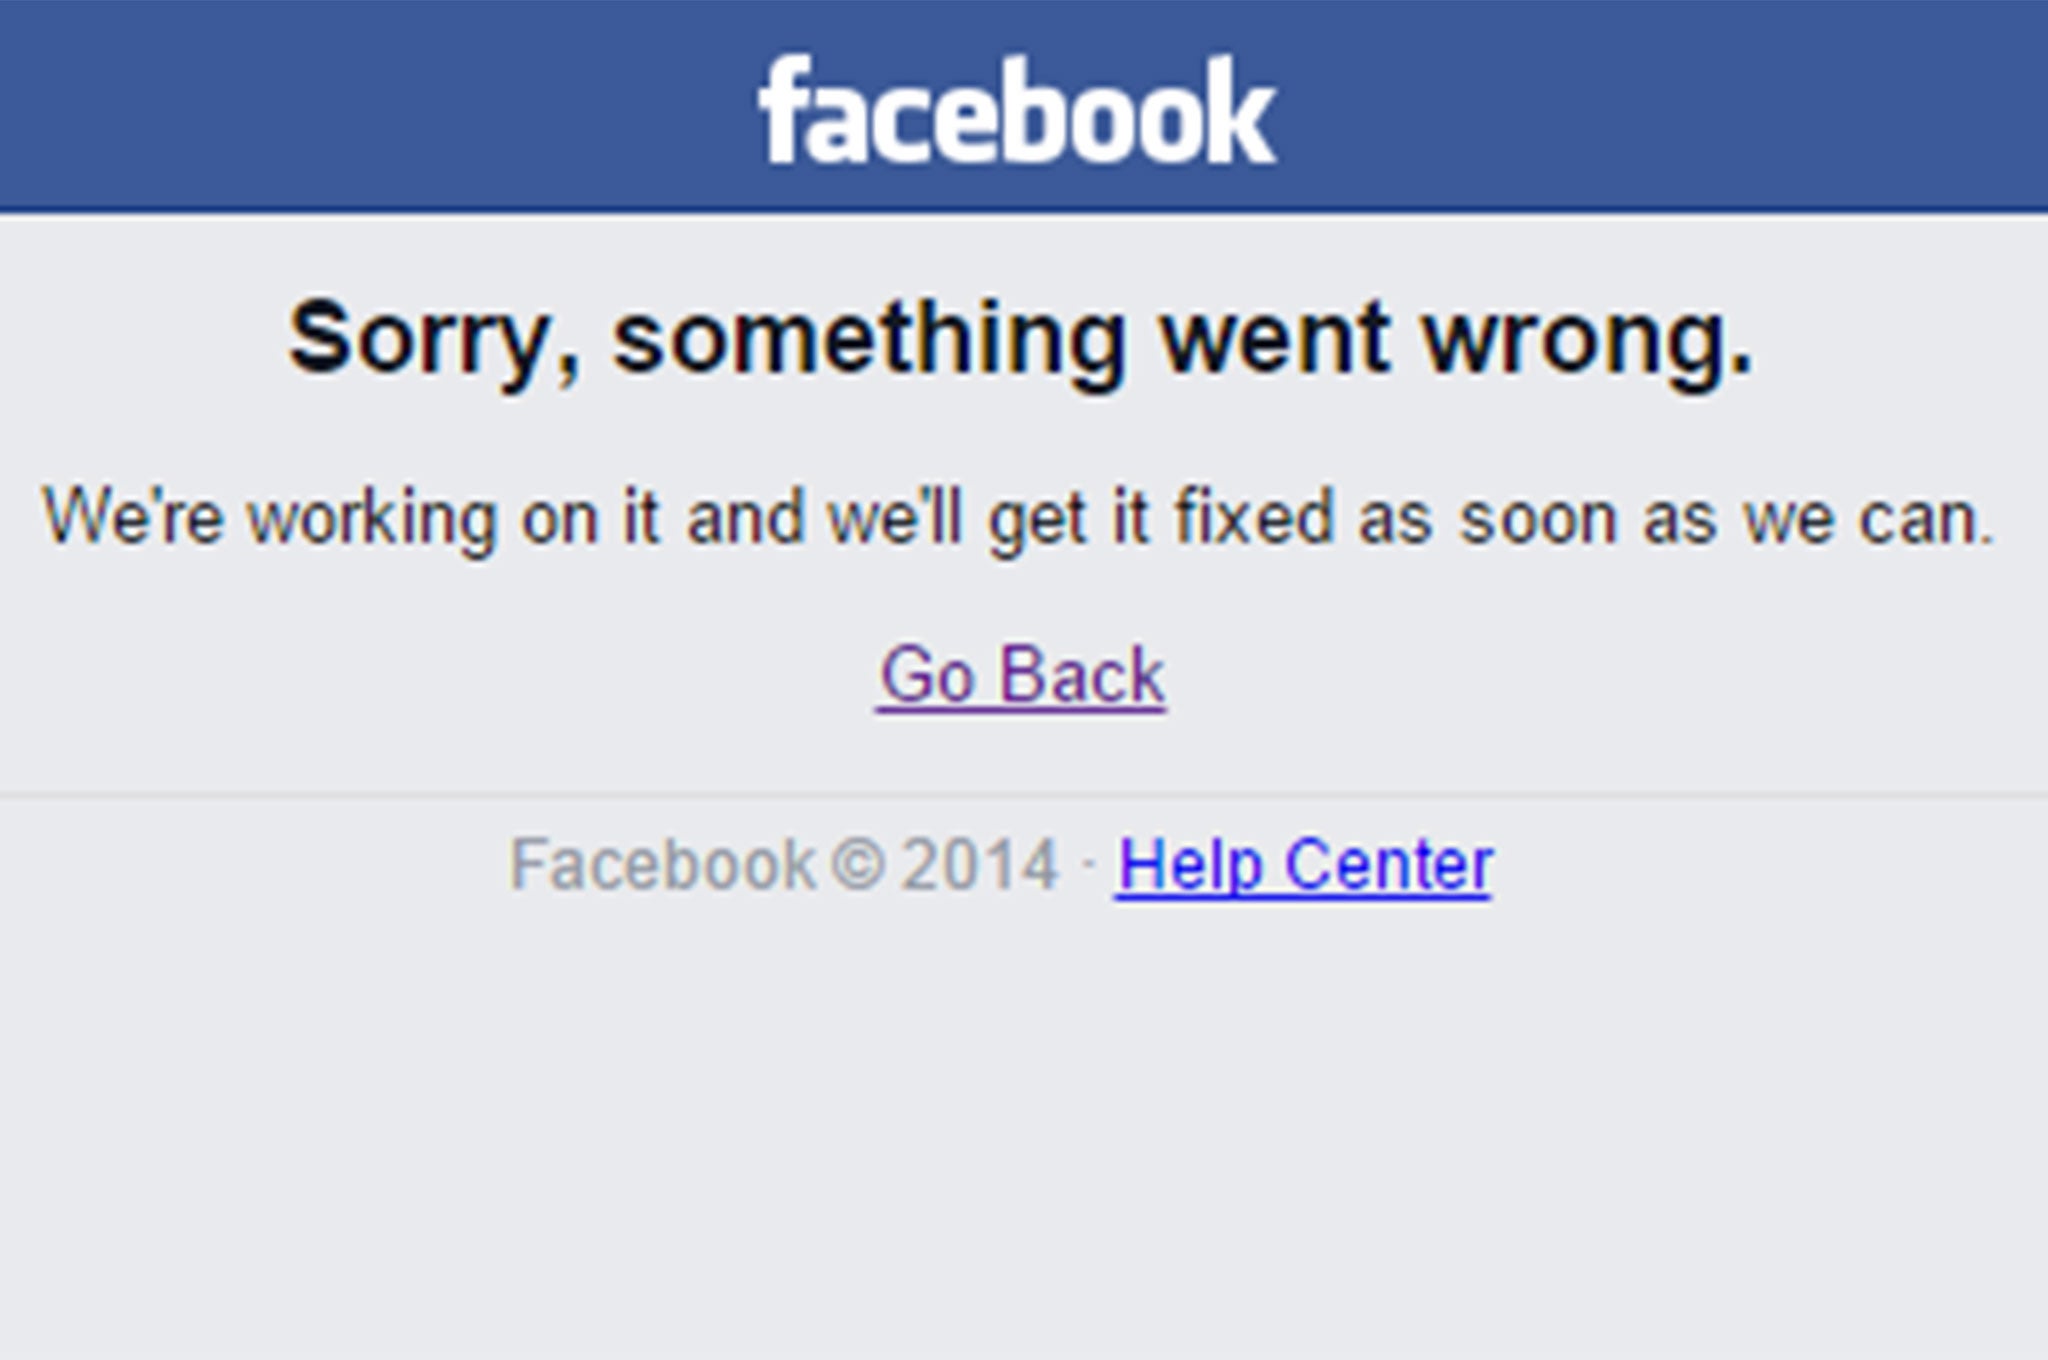 http://static.independent.co.uk/s3fs-public/thumbnails/image/2015/01/27/07/facebook-down.jpg